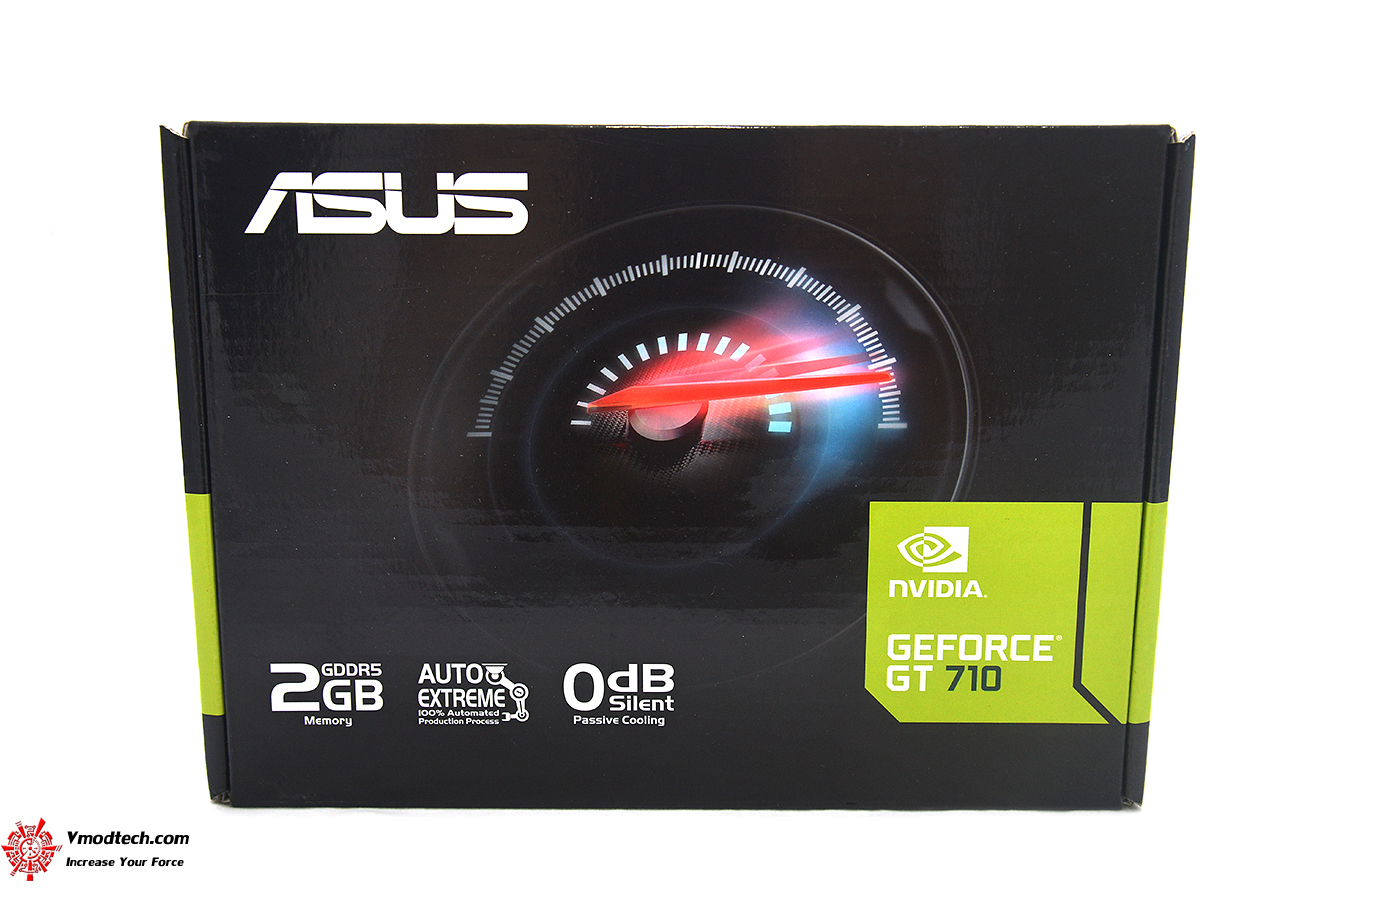 dsc 5610 ASUS GeForce GT 710 with 4 HDMI ports Review